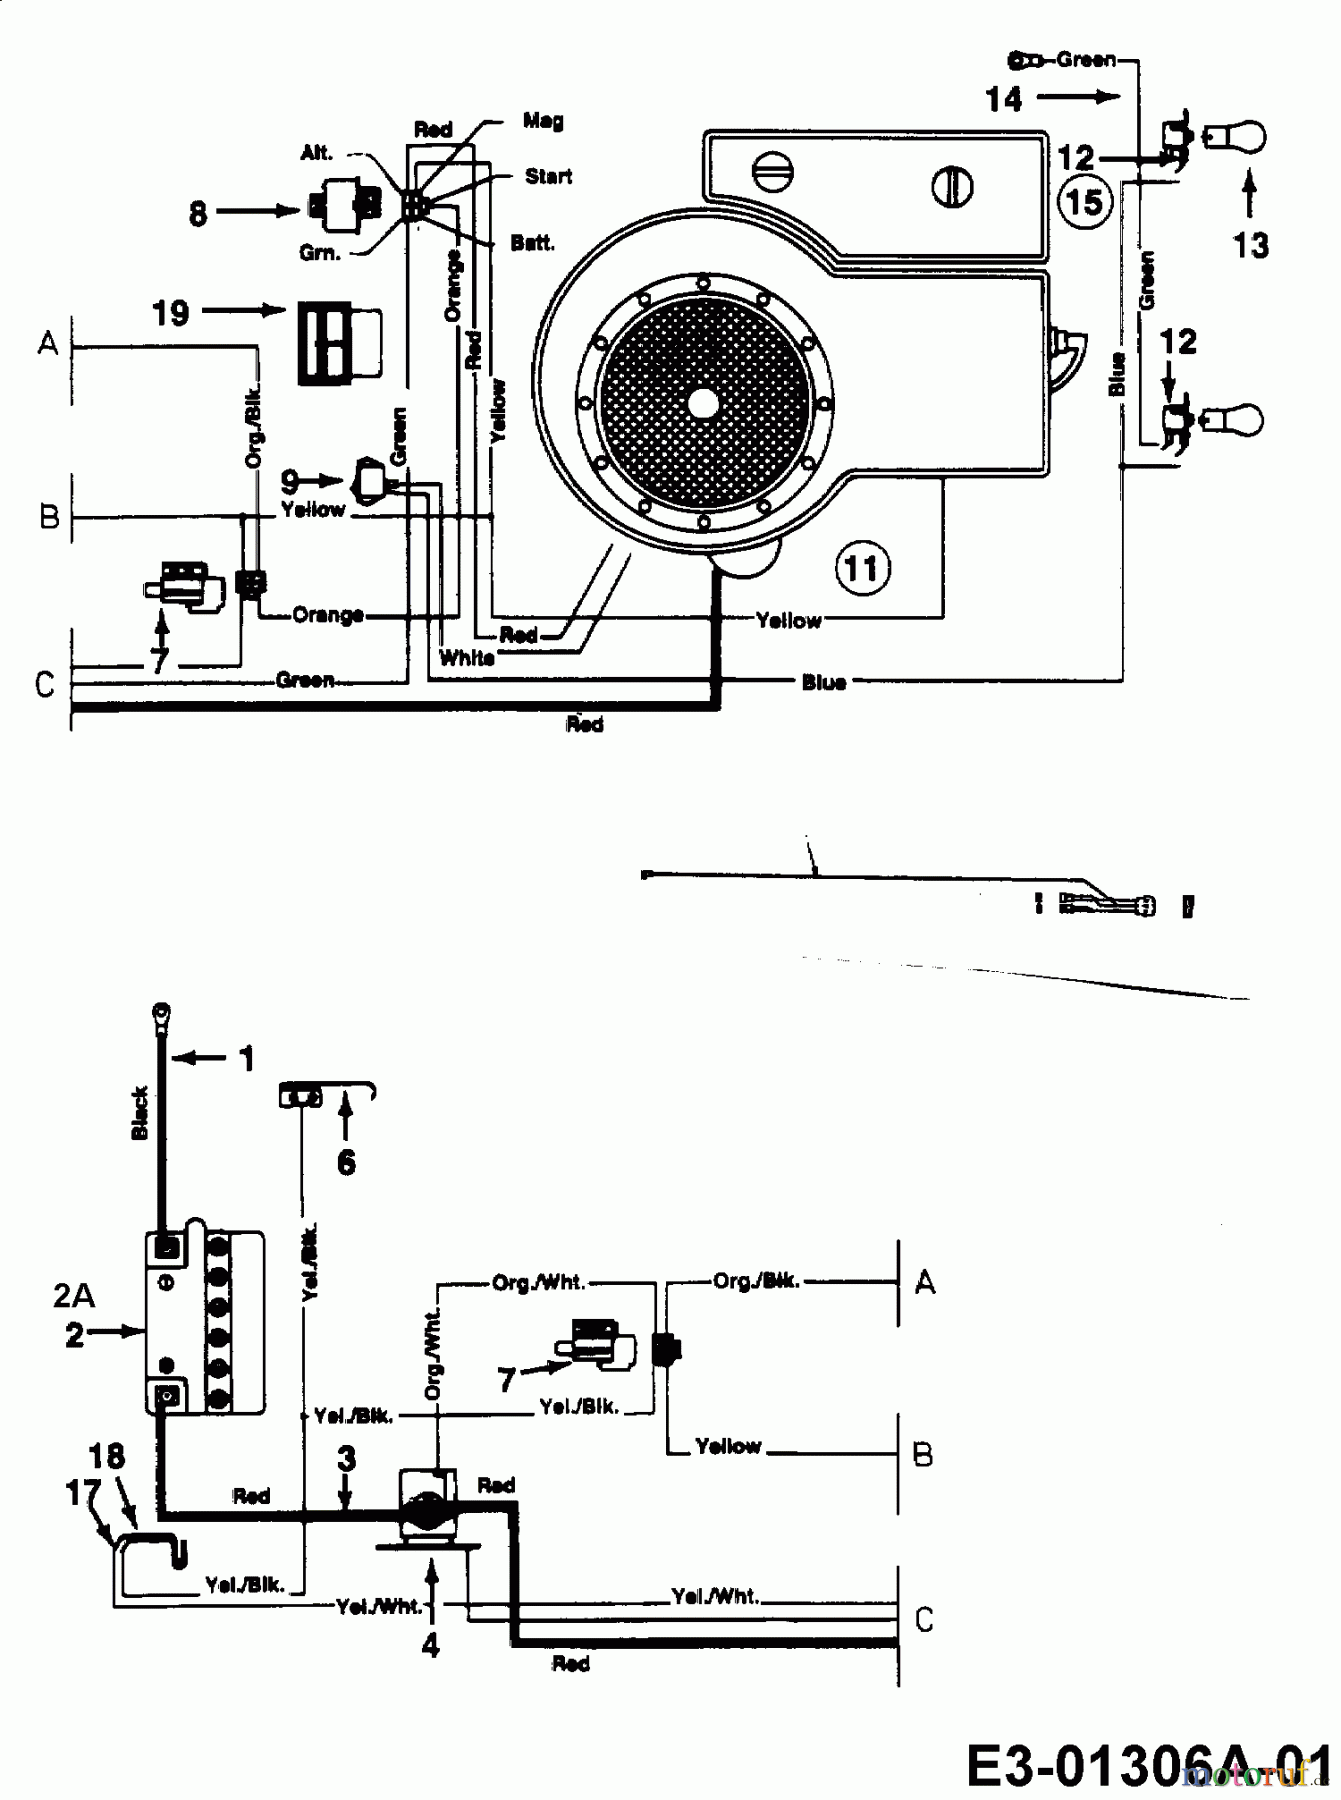  Gutbrod Lawn tractors Sprint 1400 13A145GC604  (1998) Wiring diagram single cylinder